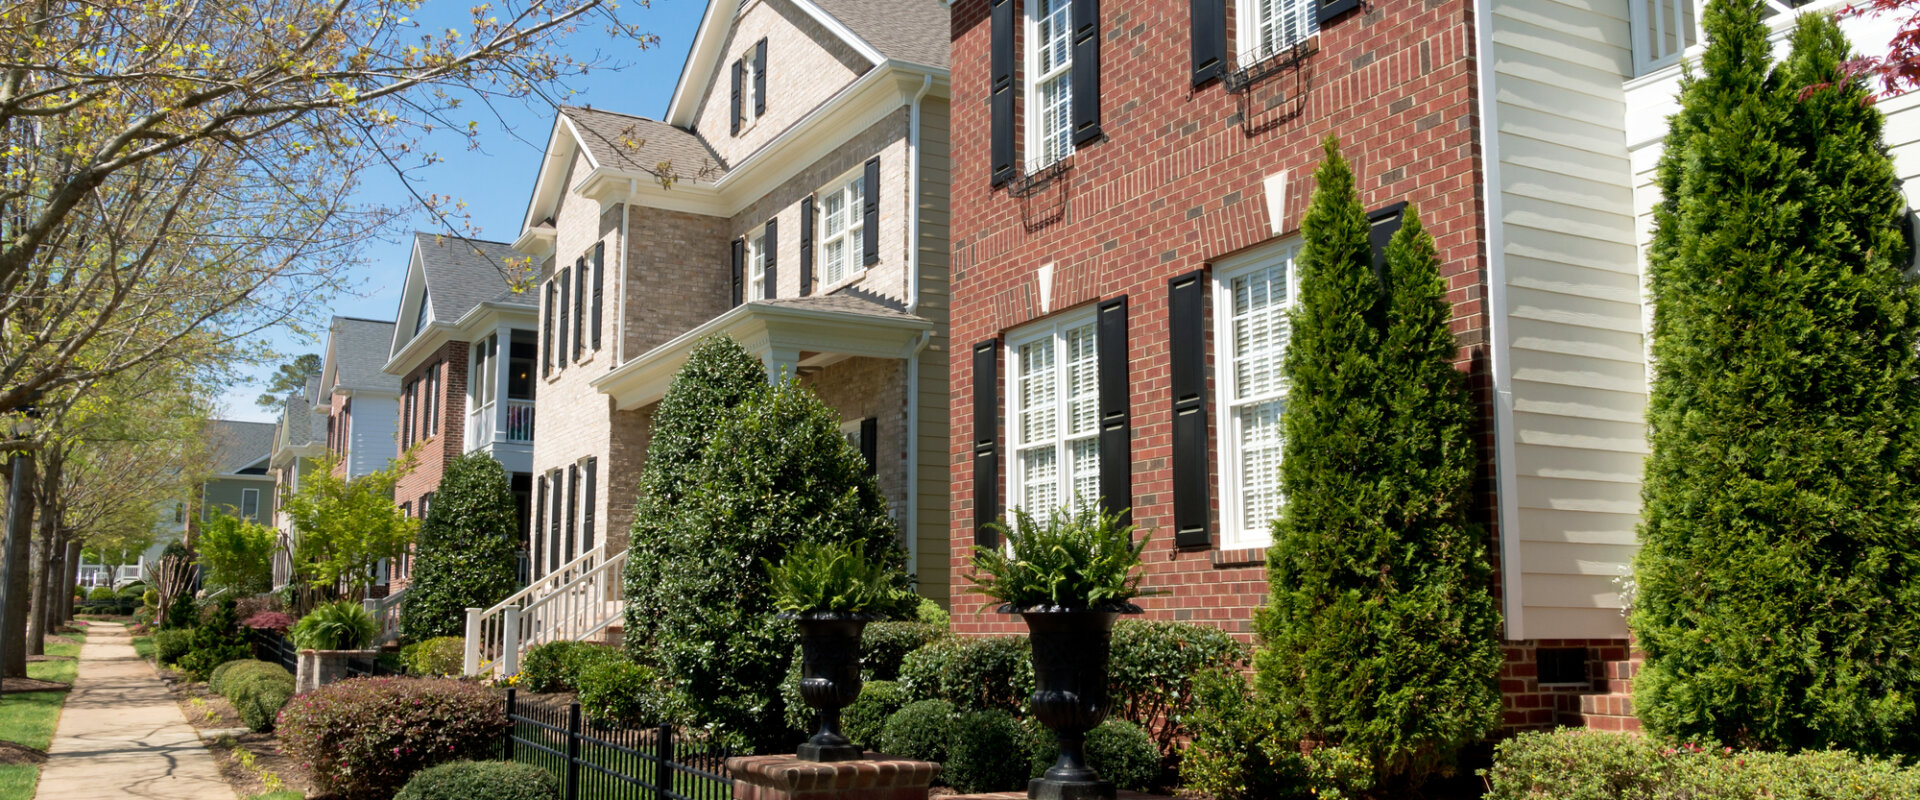 Sell Your House Fast In West Orange, NJ (2)